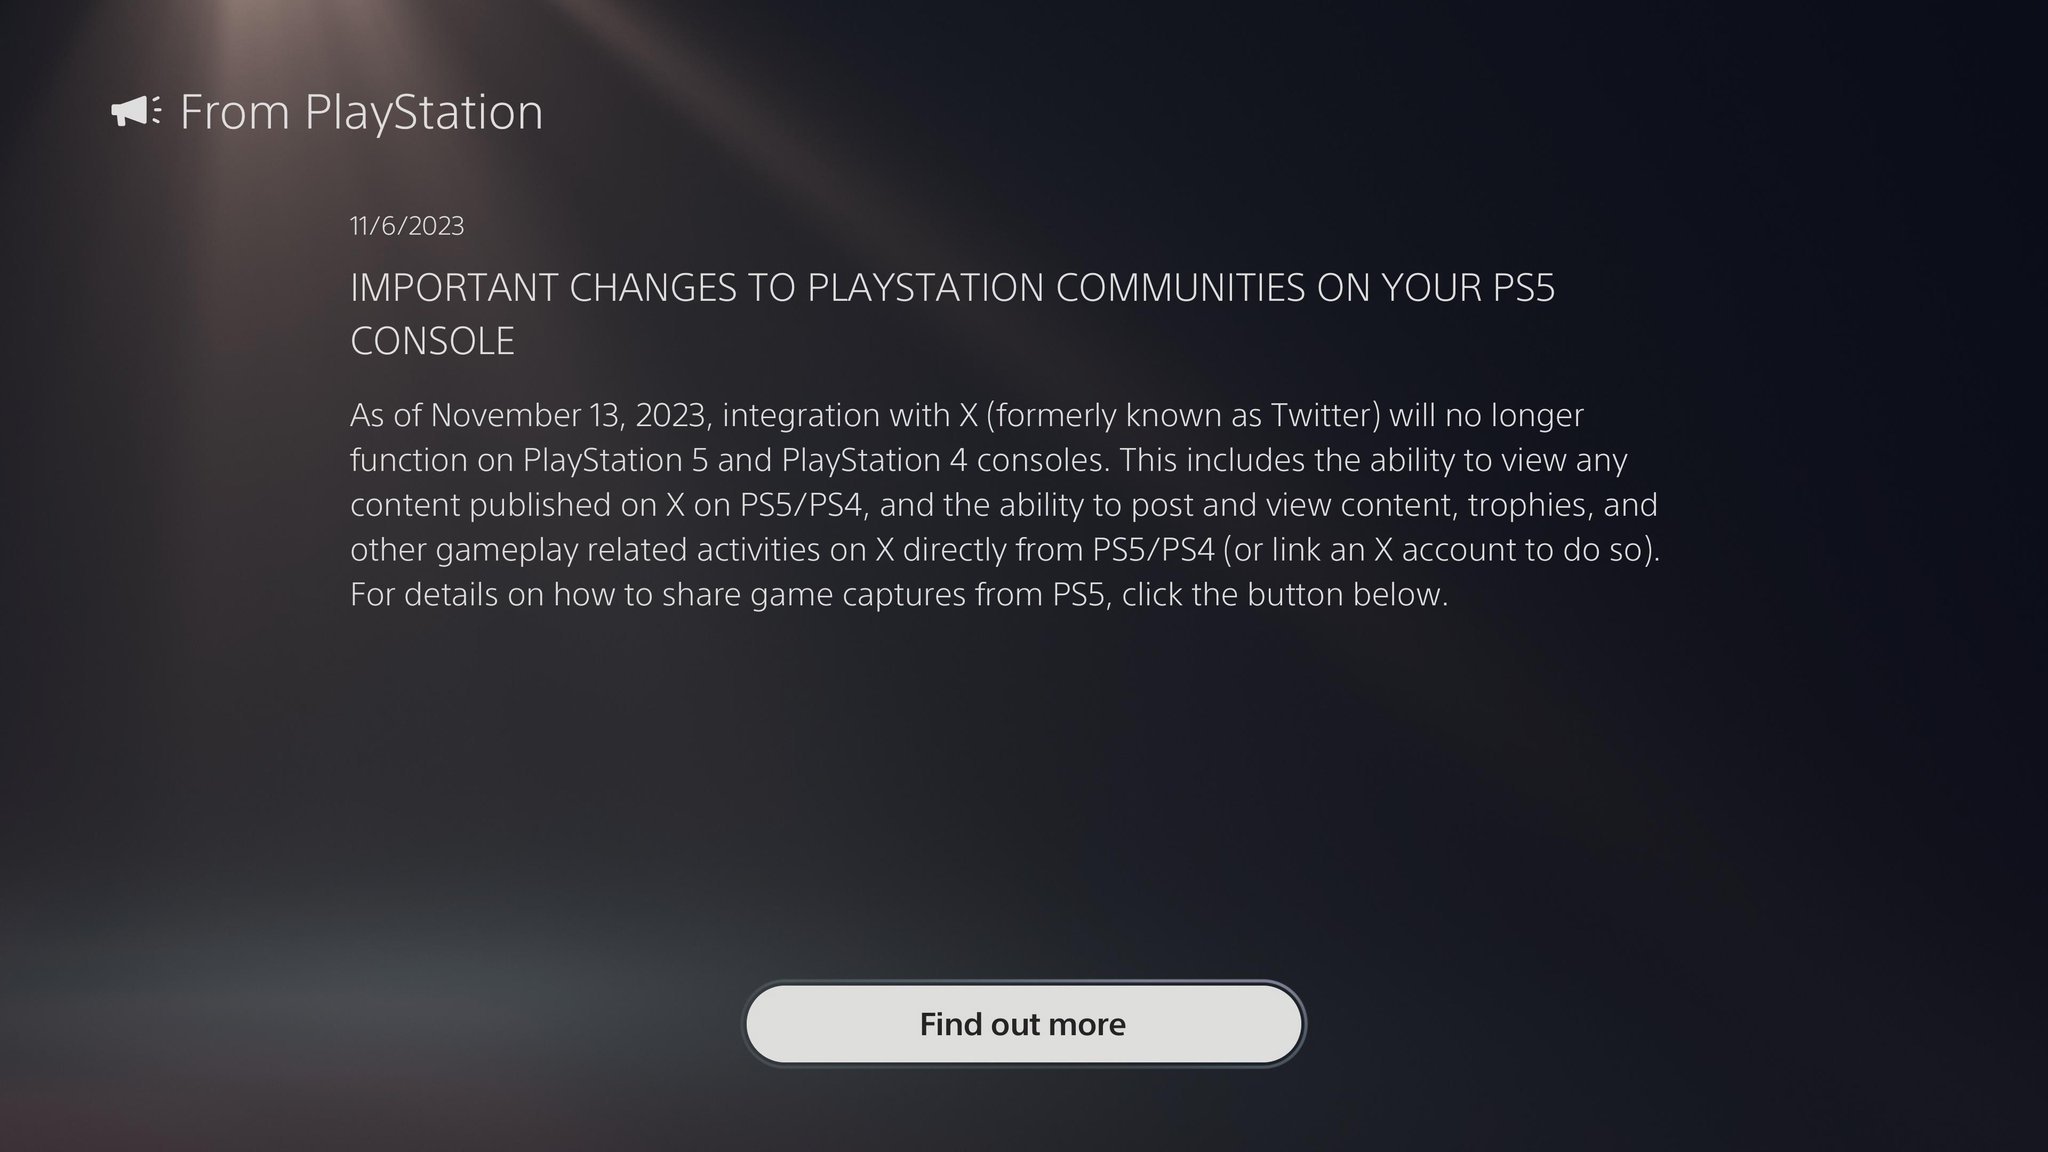 The notification revealing that X/Twitter integration on PS4 and PS5 is going away.